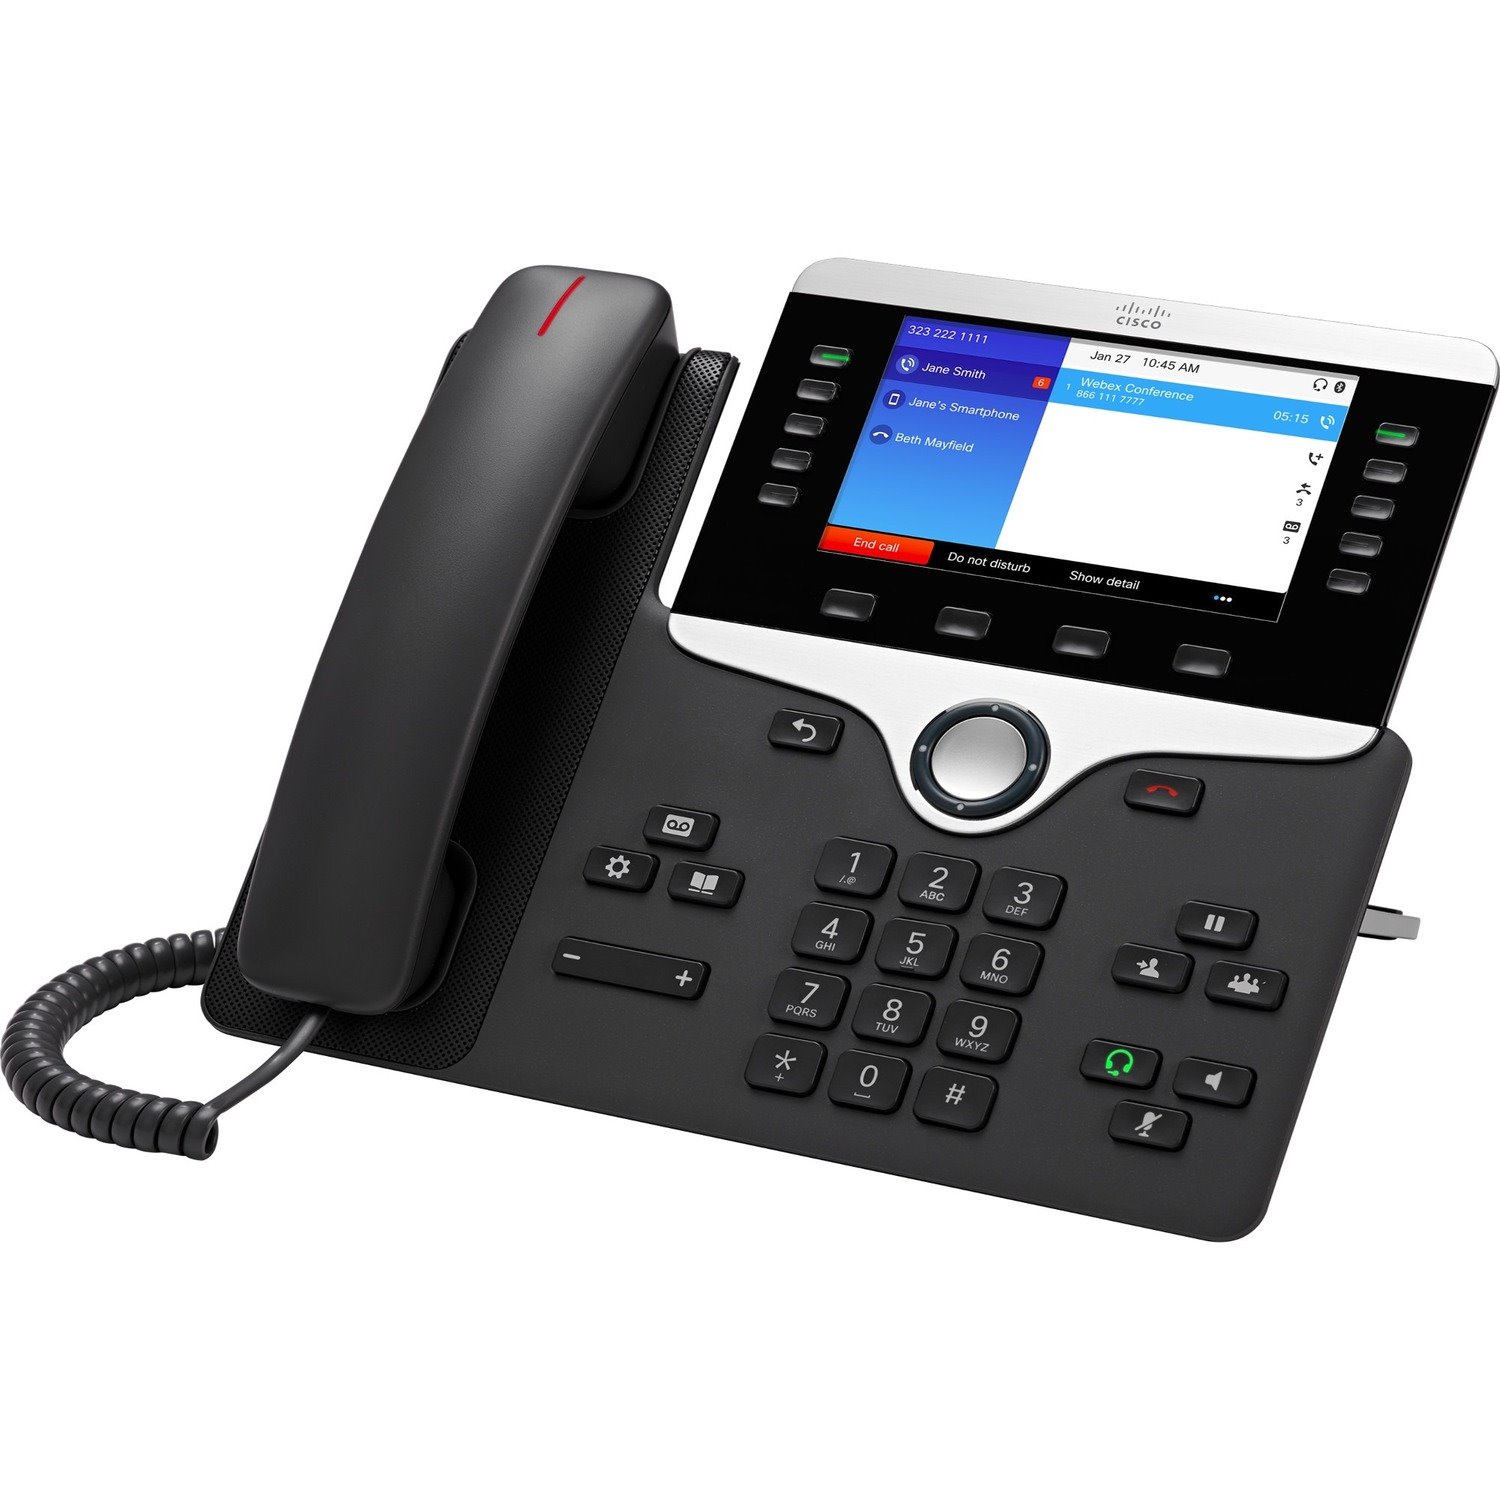 Cisco 8851 IP Phone - Corded/Cordless - Corded - Bluetooth - Tabletop, Wall Mountable - Charcoal